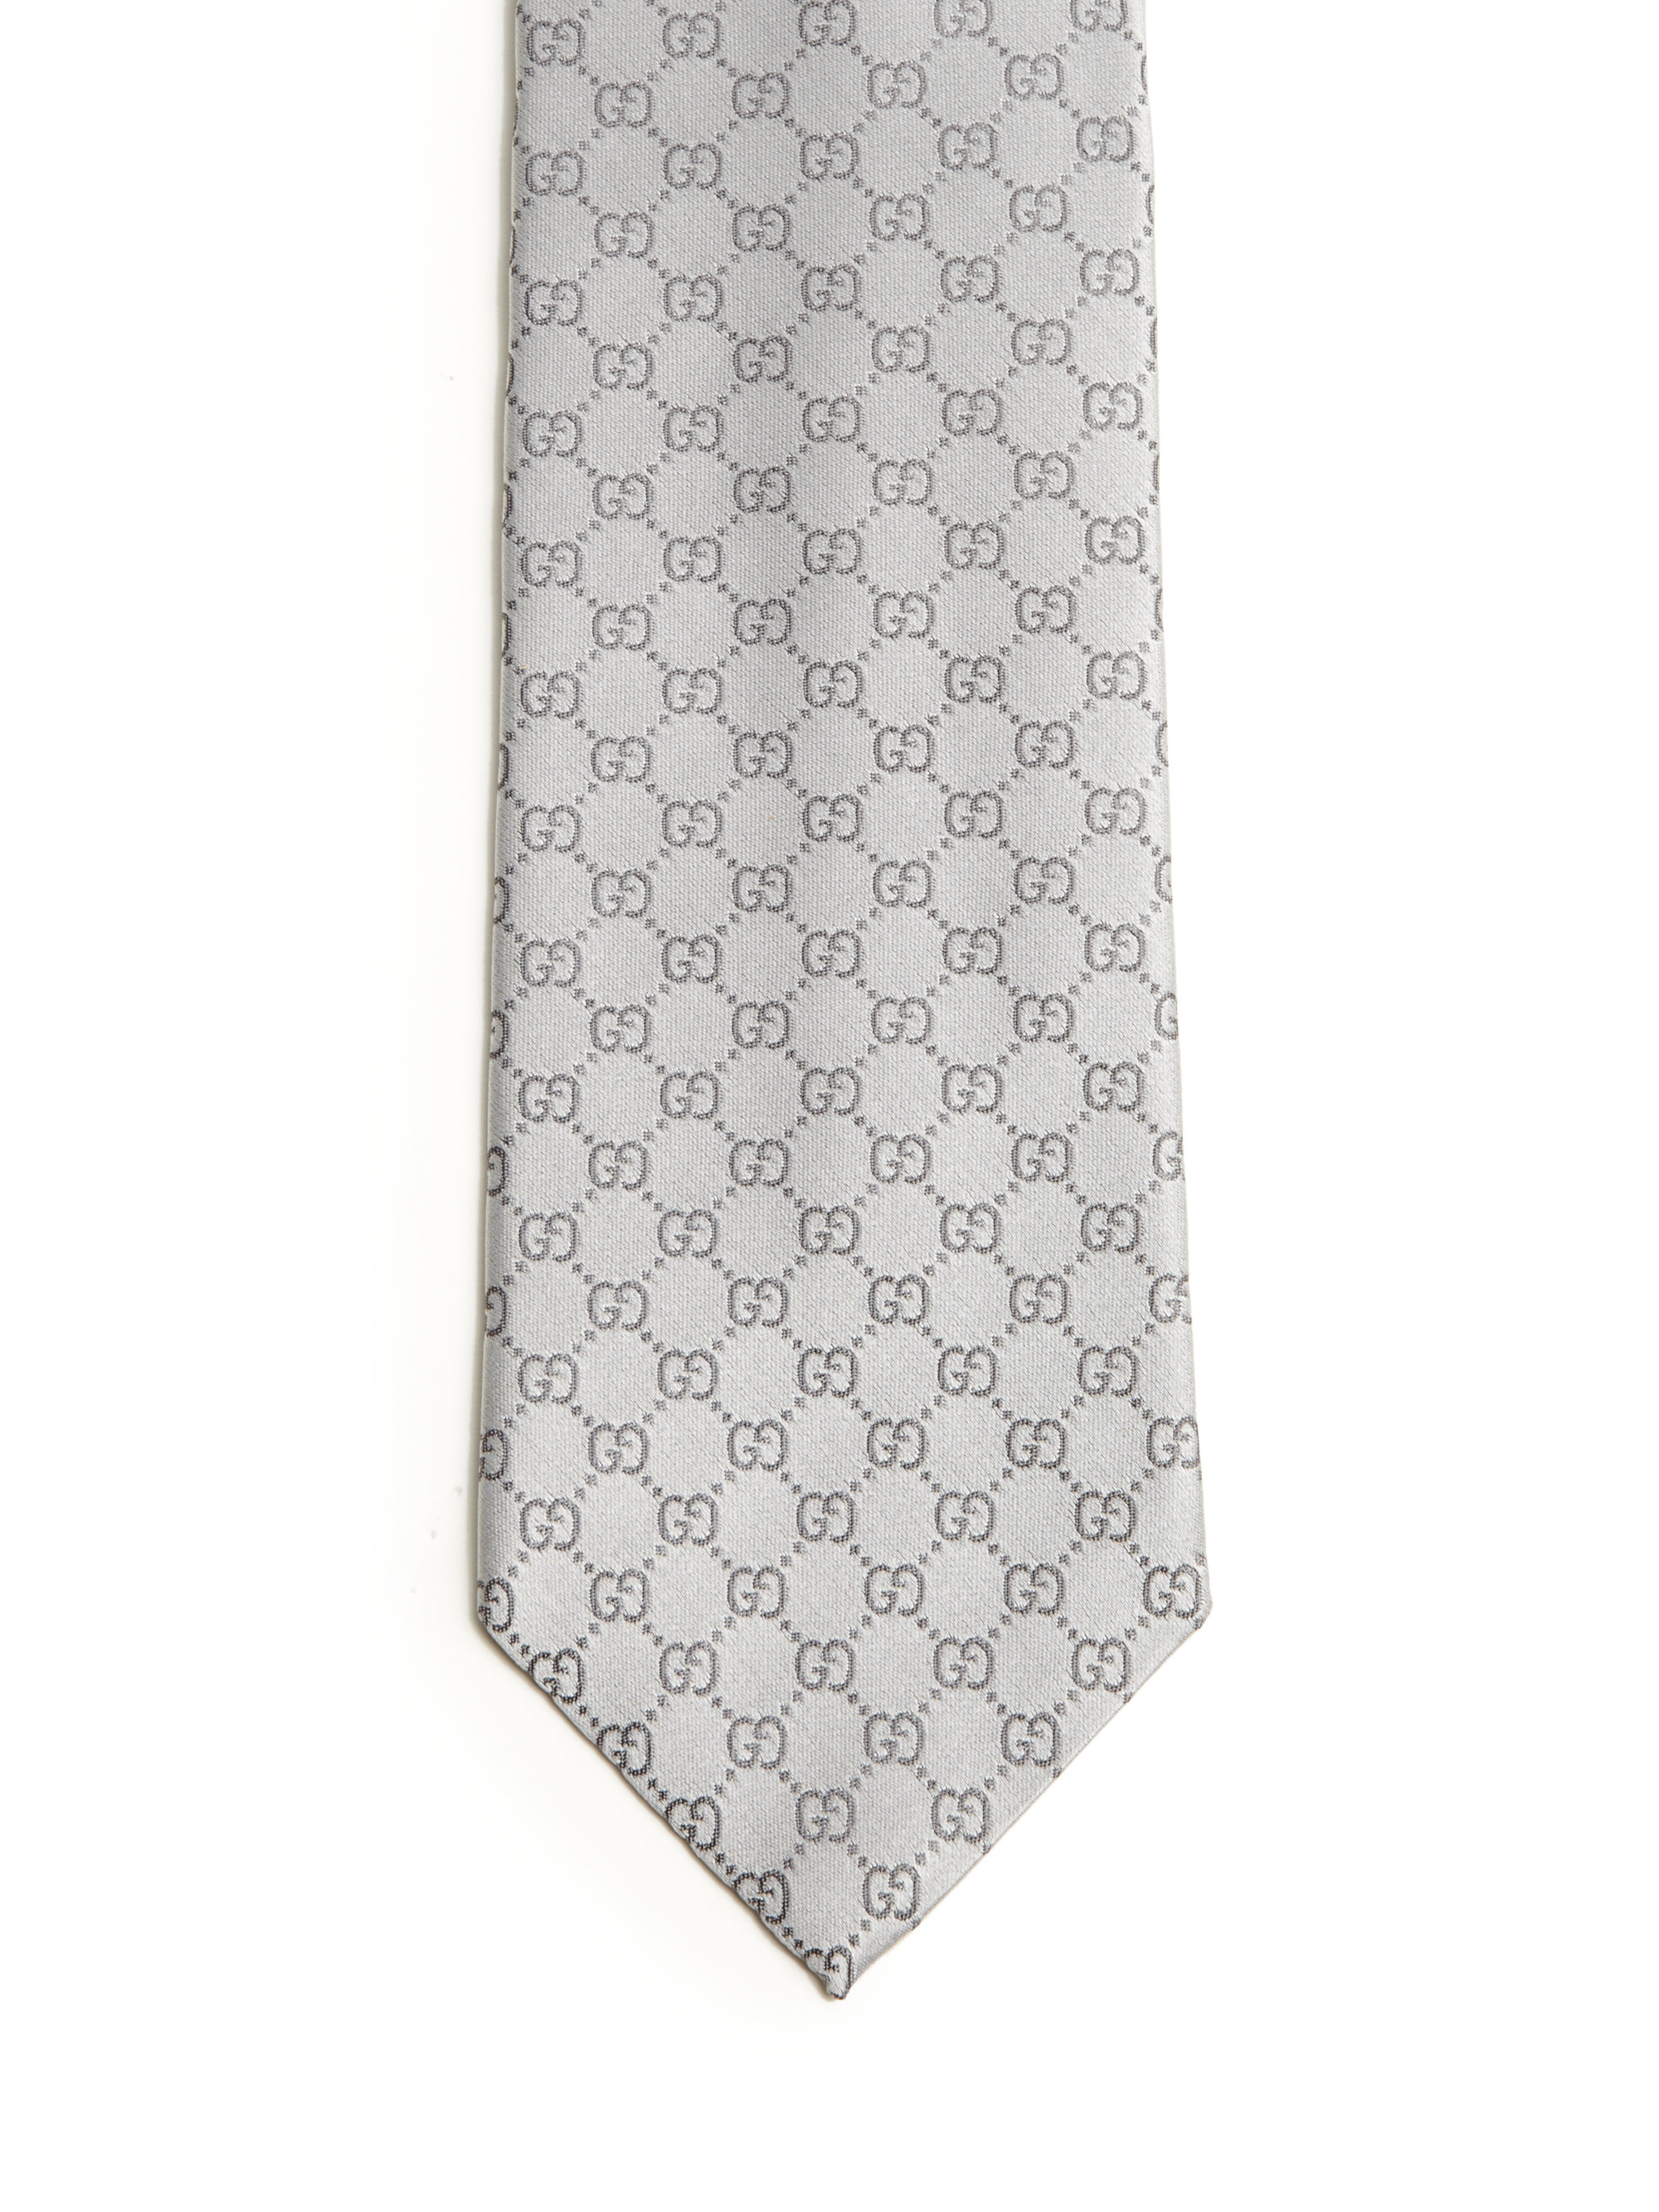 Gucci Silver Monogrammed Silk Jacquard Tie in for Men - Lyst